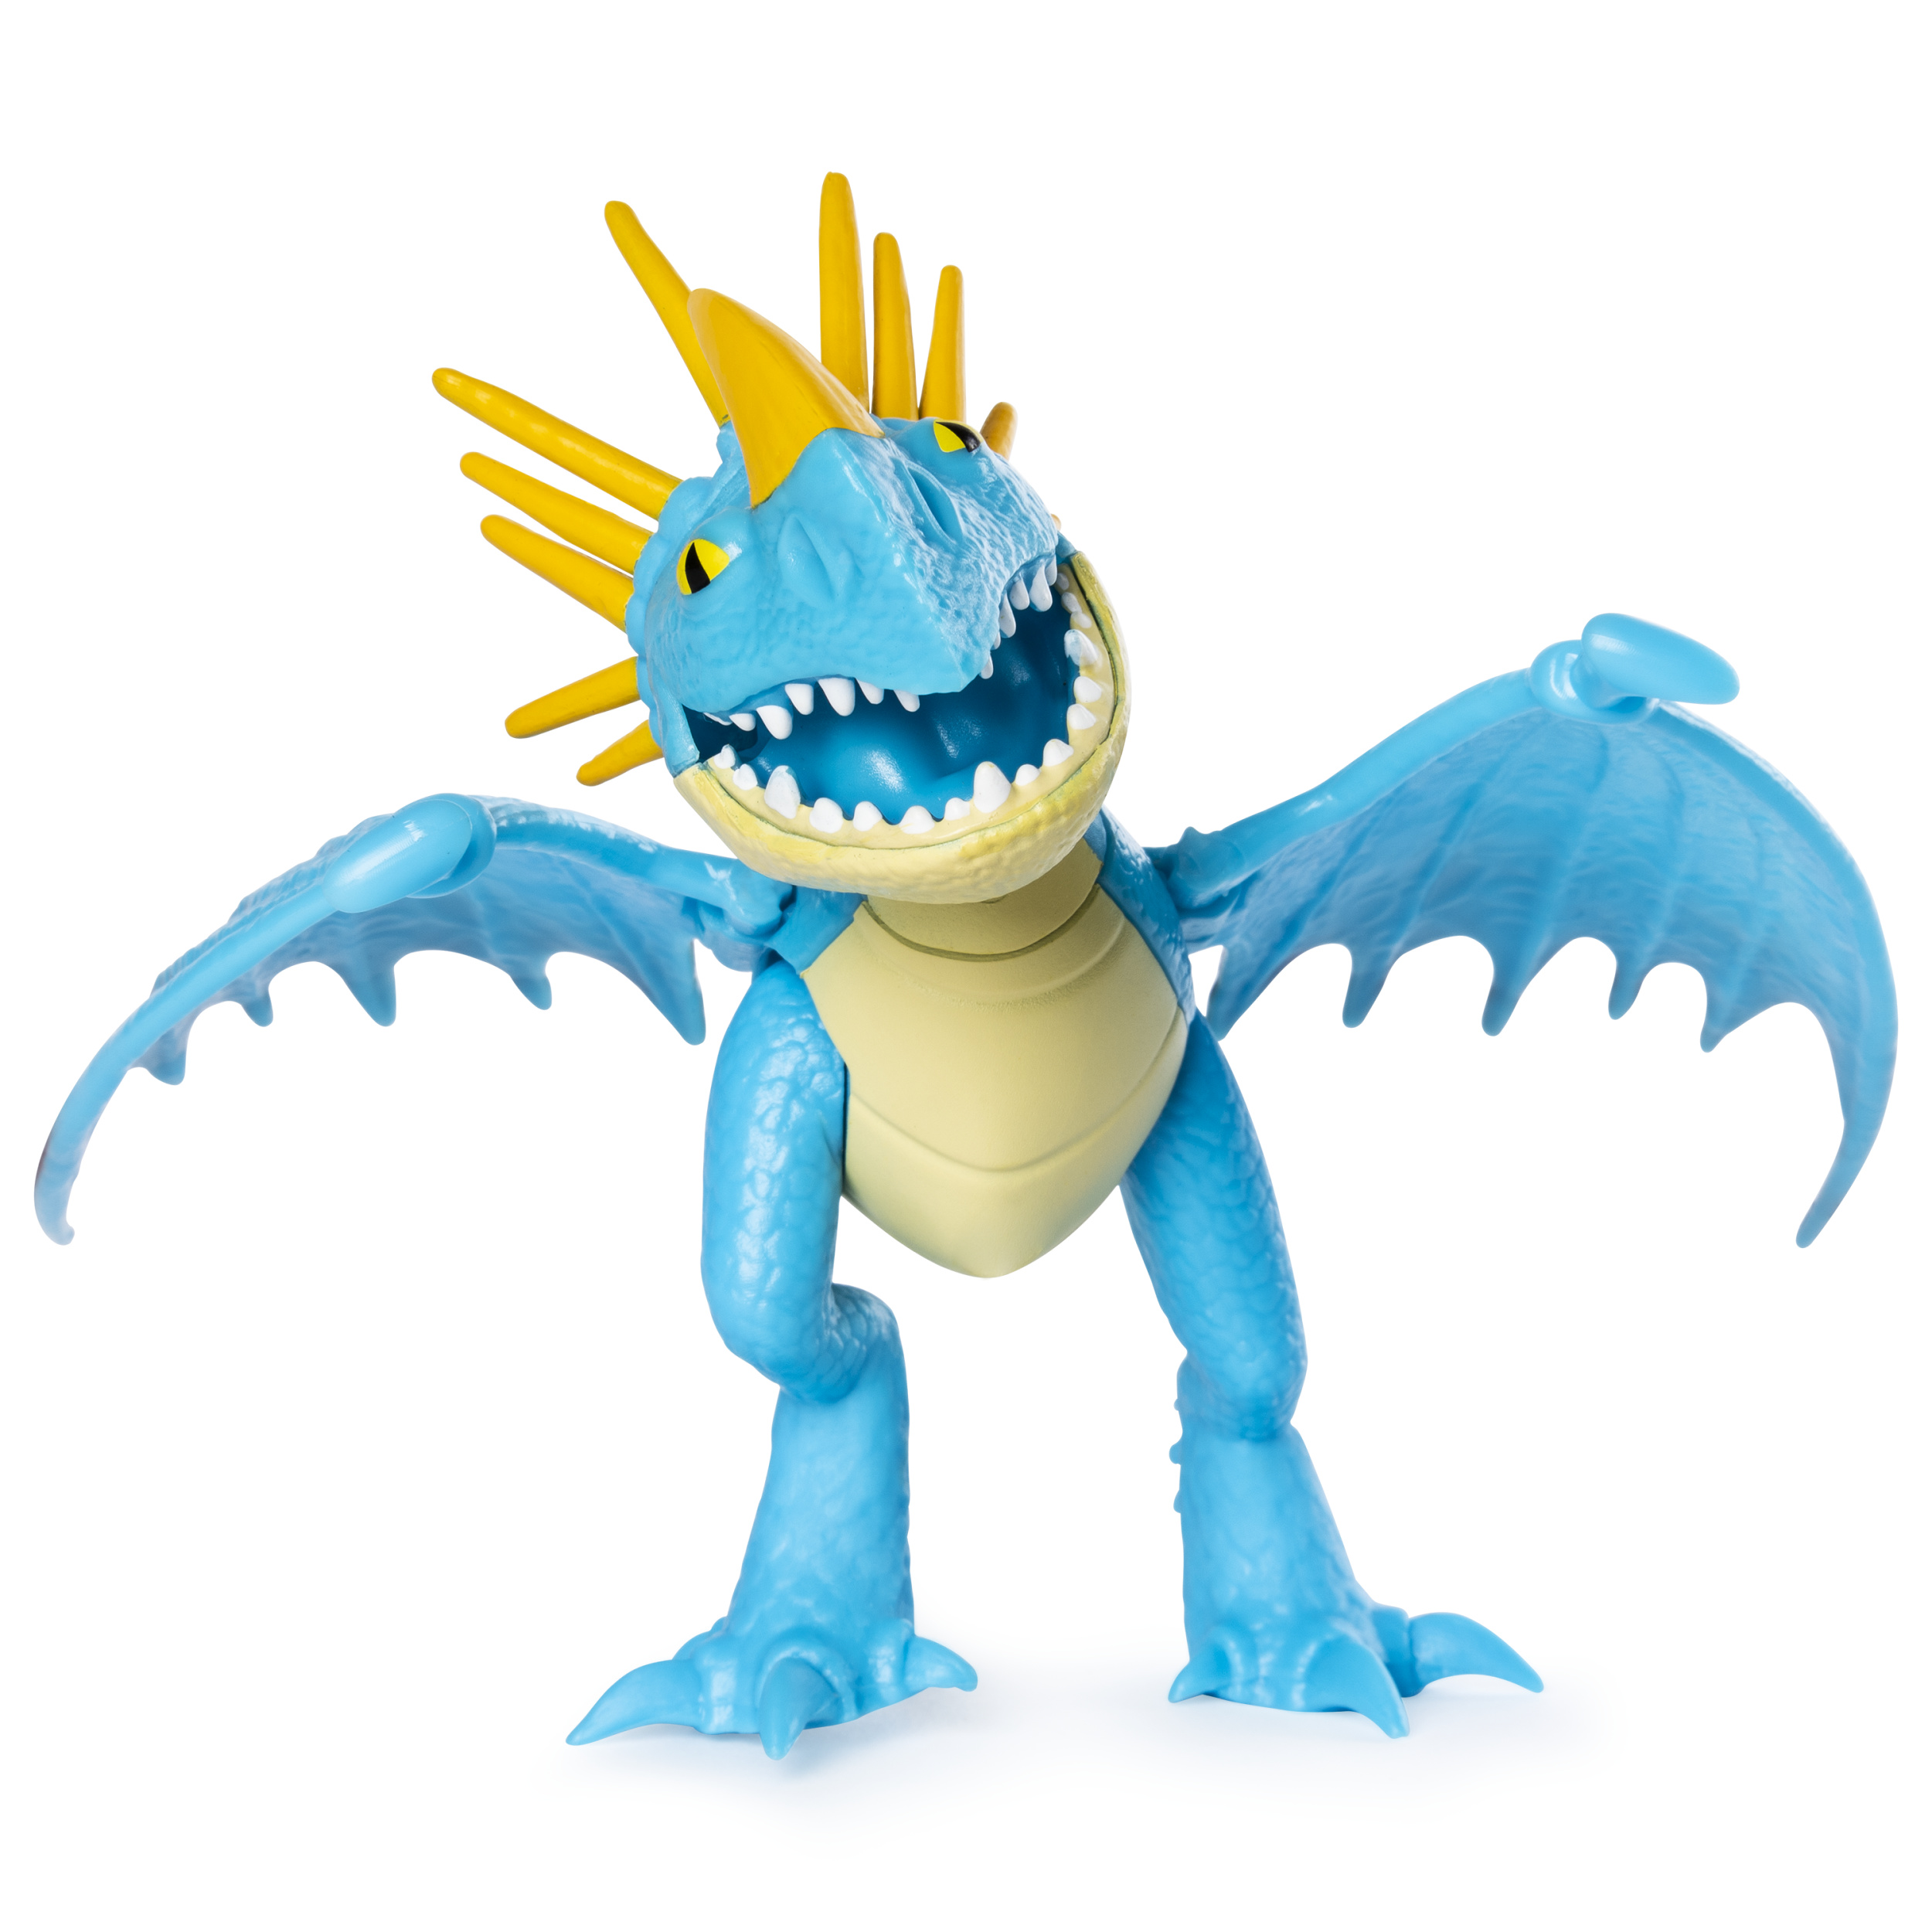 DreamWorks Dragons, Stormfly Dragon Figure with Moving Parts, for Kids Aged 4 and up - image 3 of 4